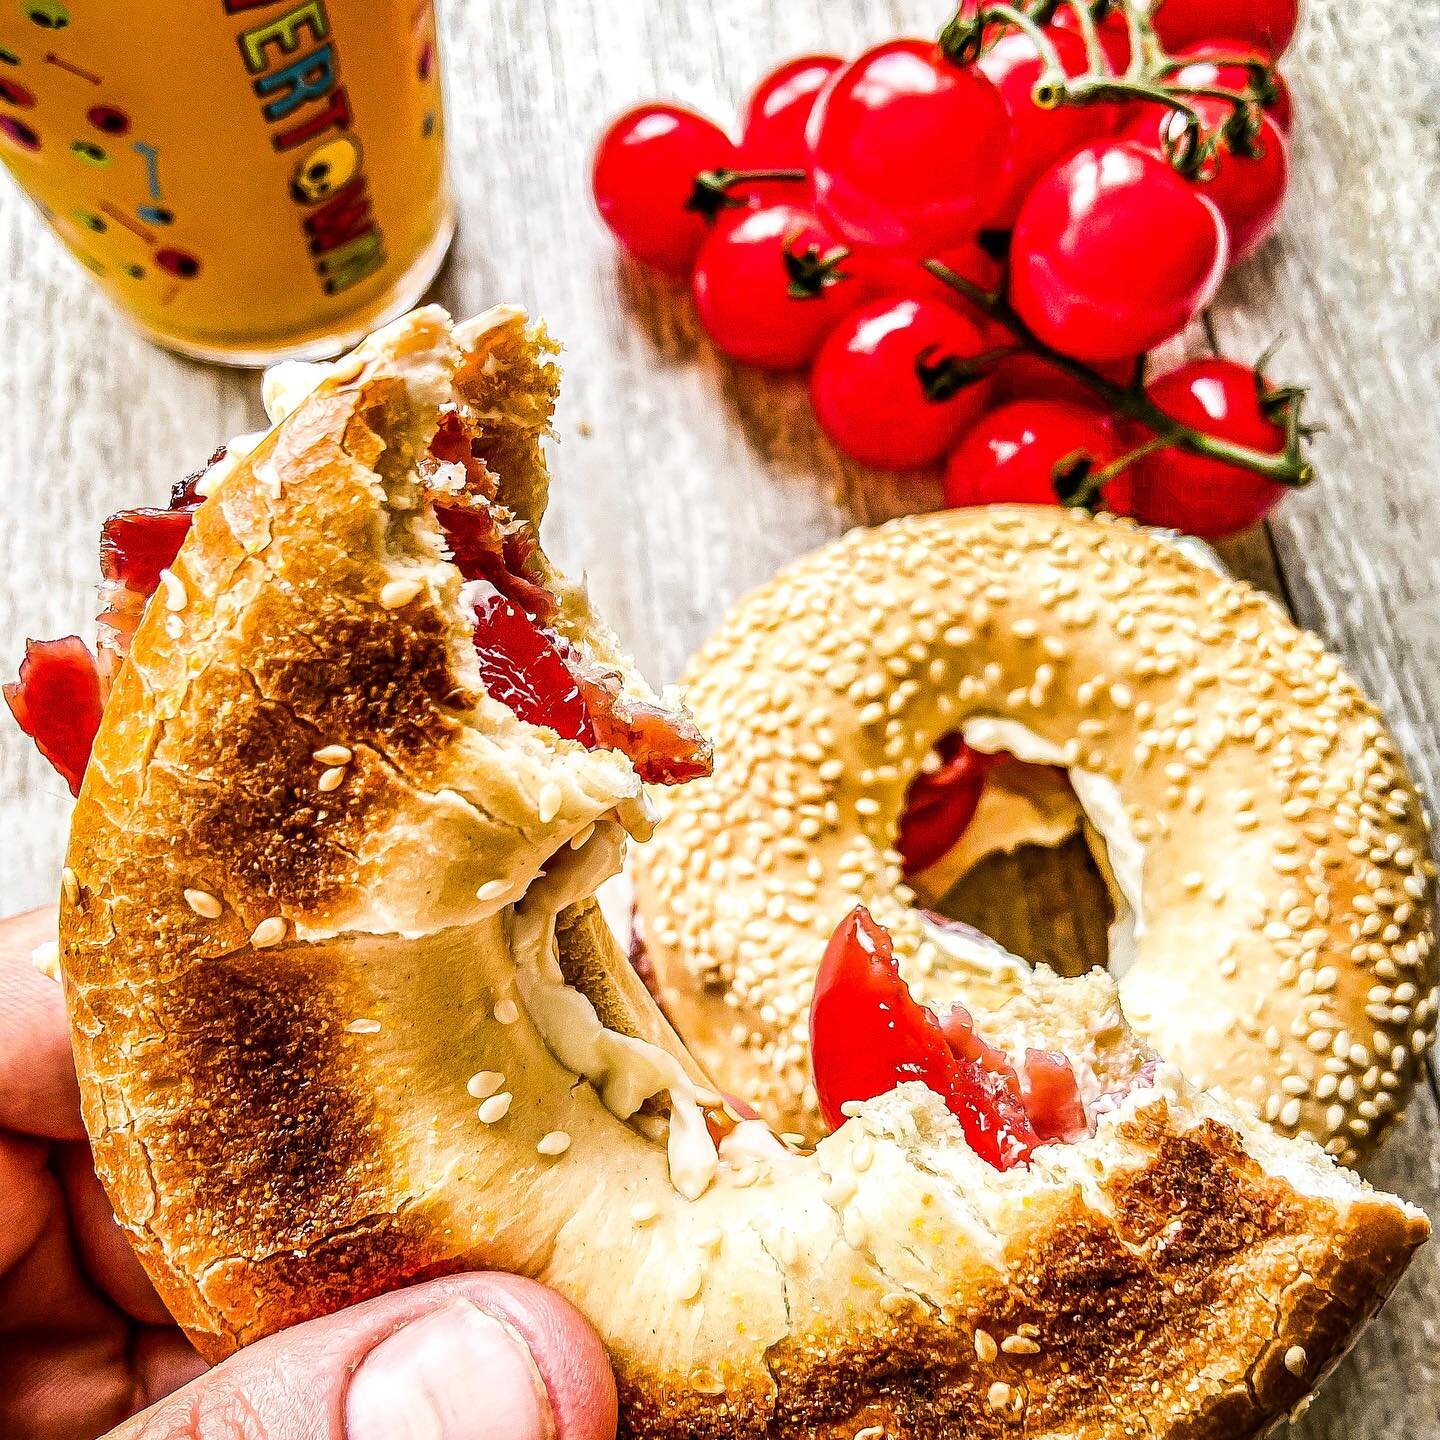 Breakfast of the gods. Crispy bacon, juicy tomatoes, cream cheese and sesame bagels. Does breakfast get better than this? What&rsquo;s your favourite breakfast? #fairleysuk #geetsaucy #bacon #philadelphiacreamcheese #vinetomatoes @warburtonsuk #bagel